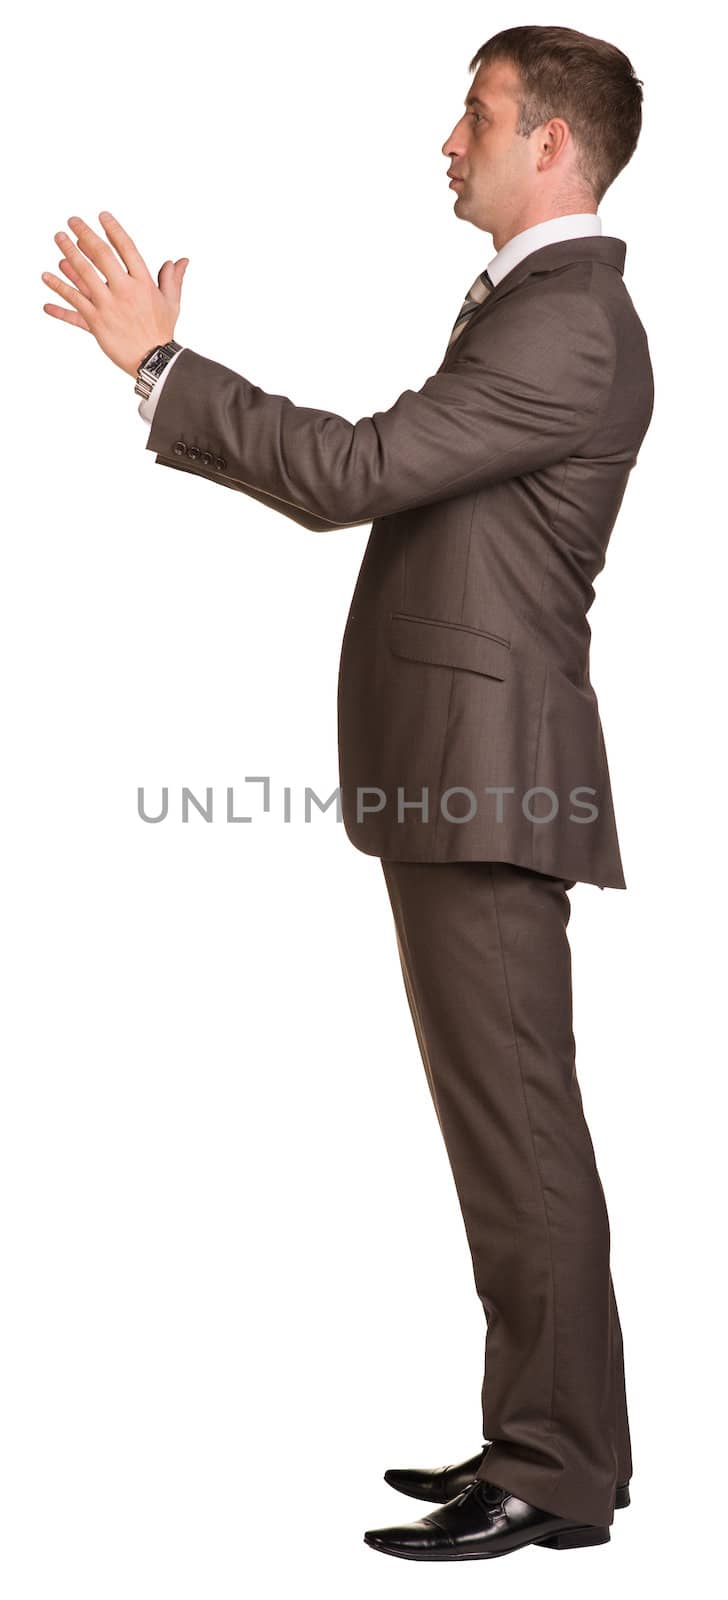 Businessman holding hands up in front of him. Isolated on white background.